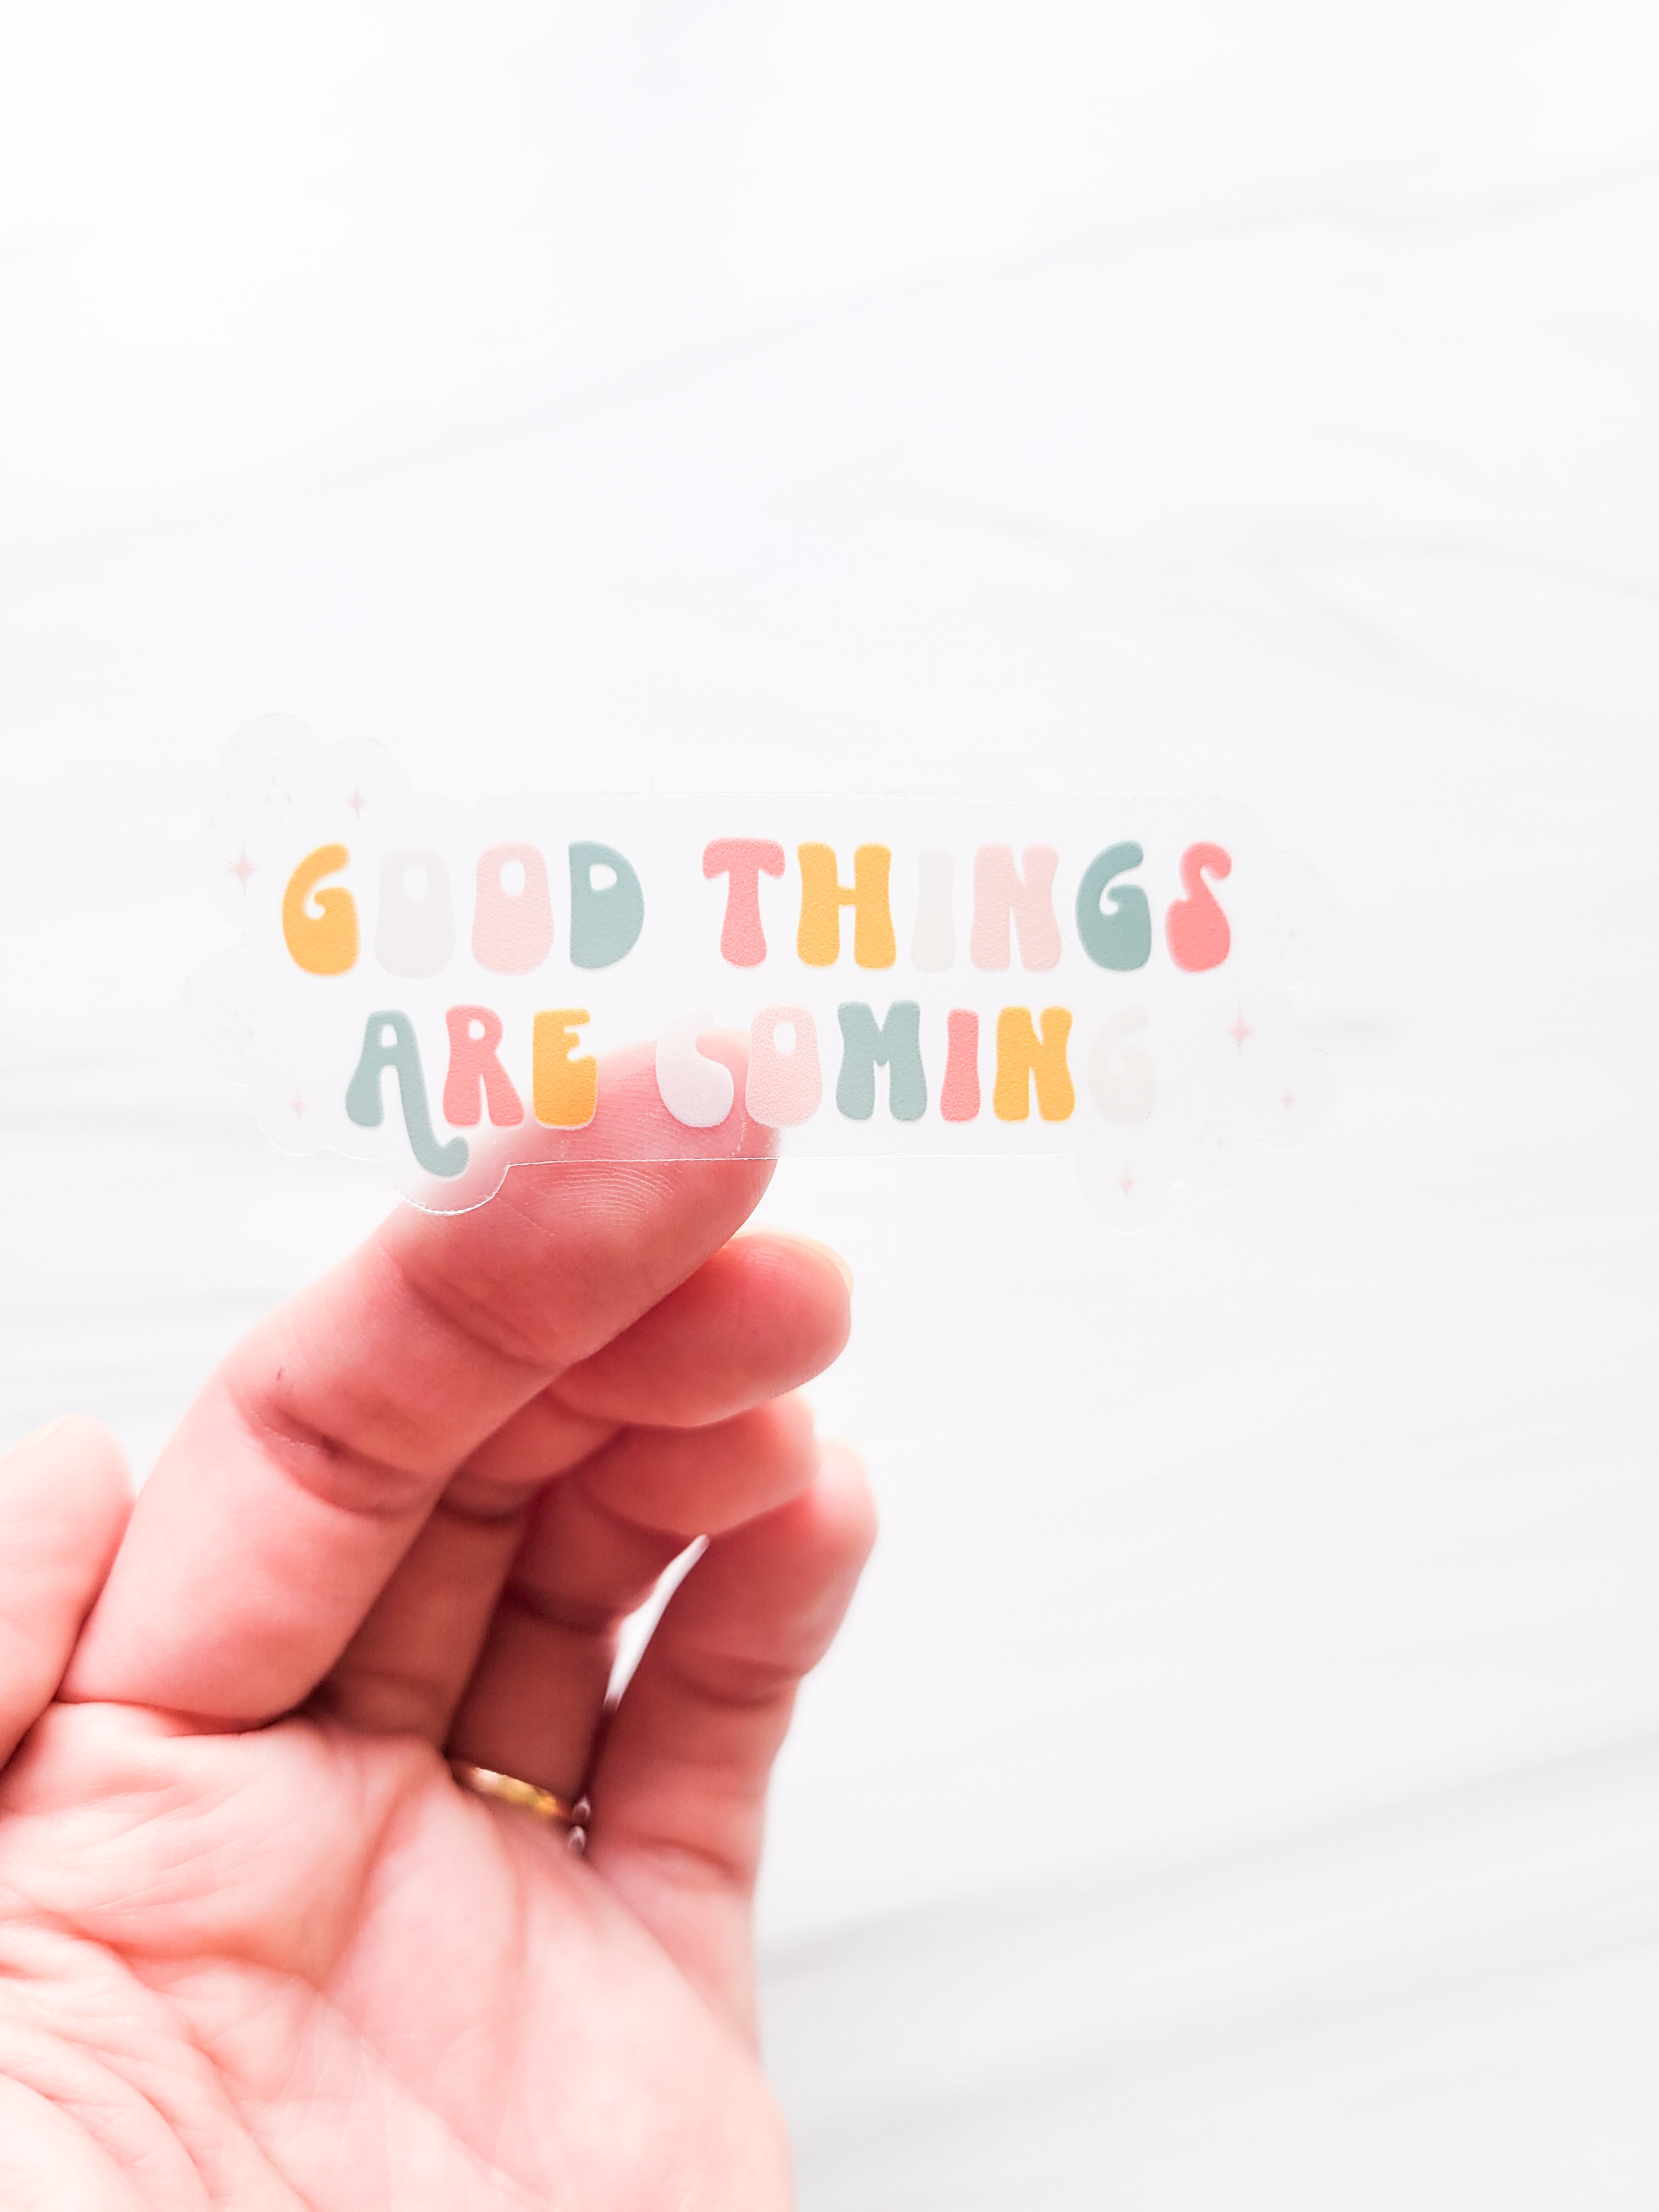 Good Things are Coming Transparent Sticker